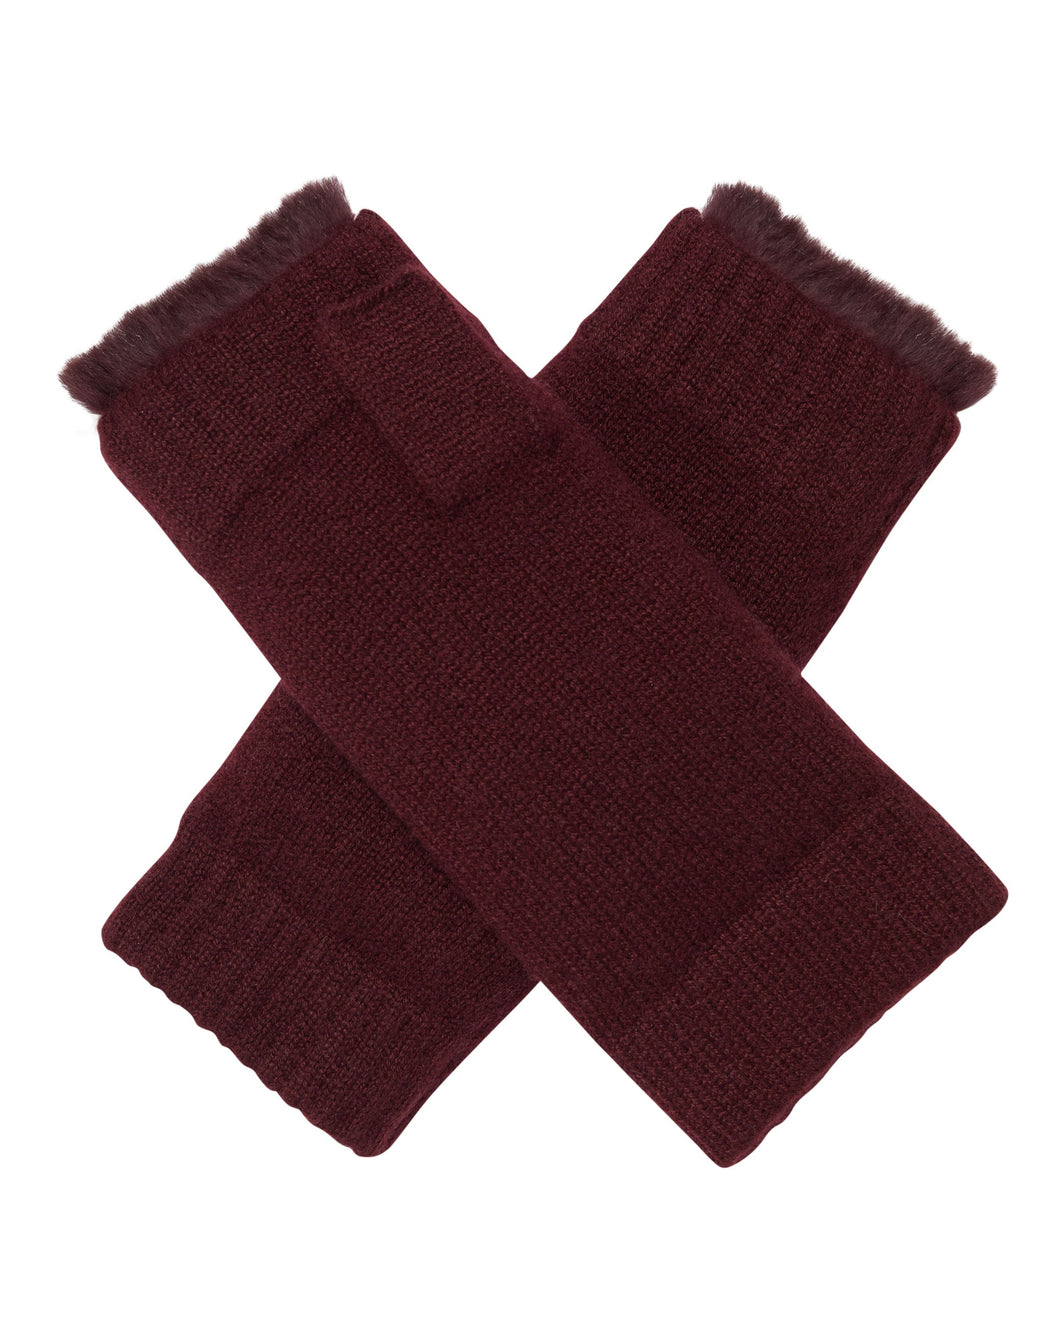 N.Peal Unisex Fur Lined Fingerless Cashmere Gloves Mulled Wine Red